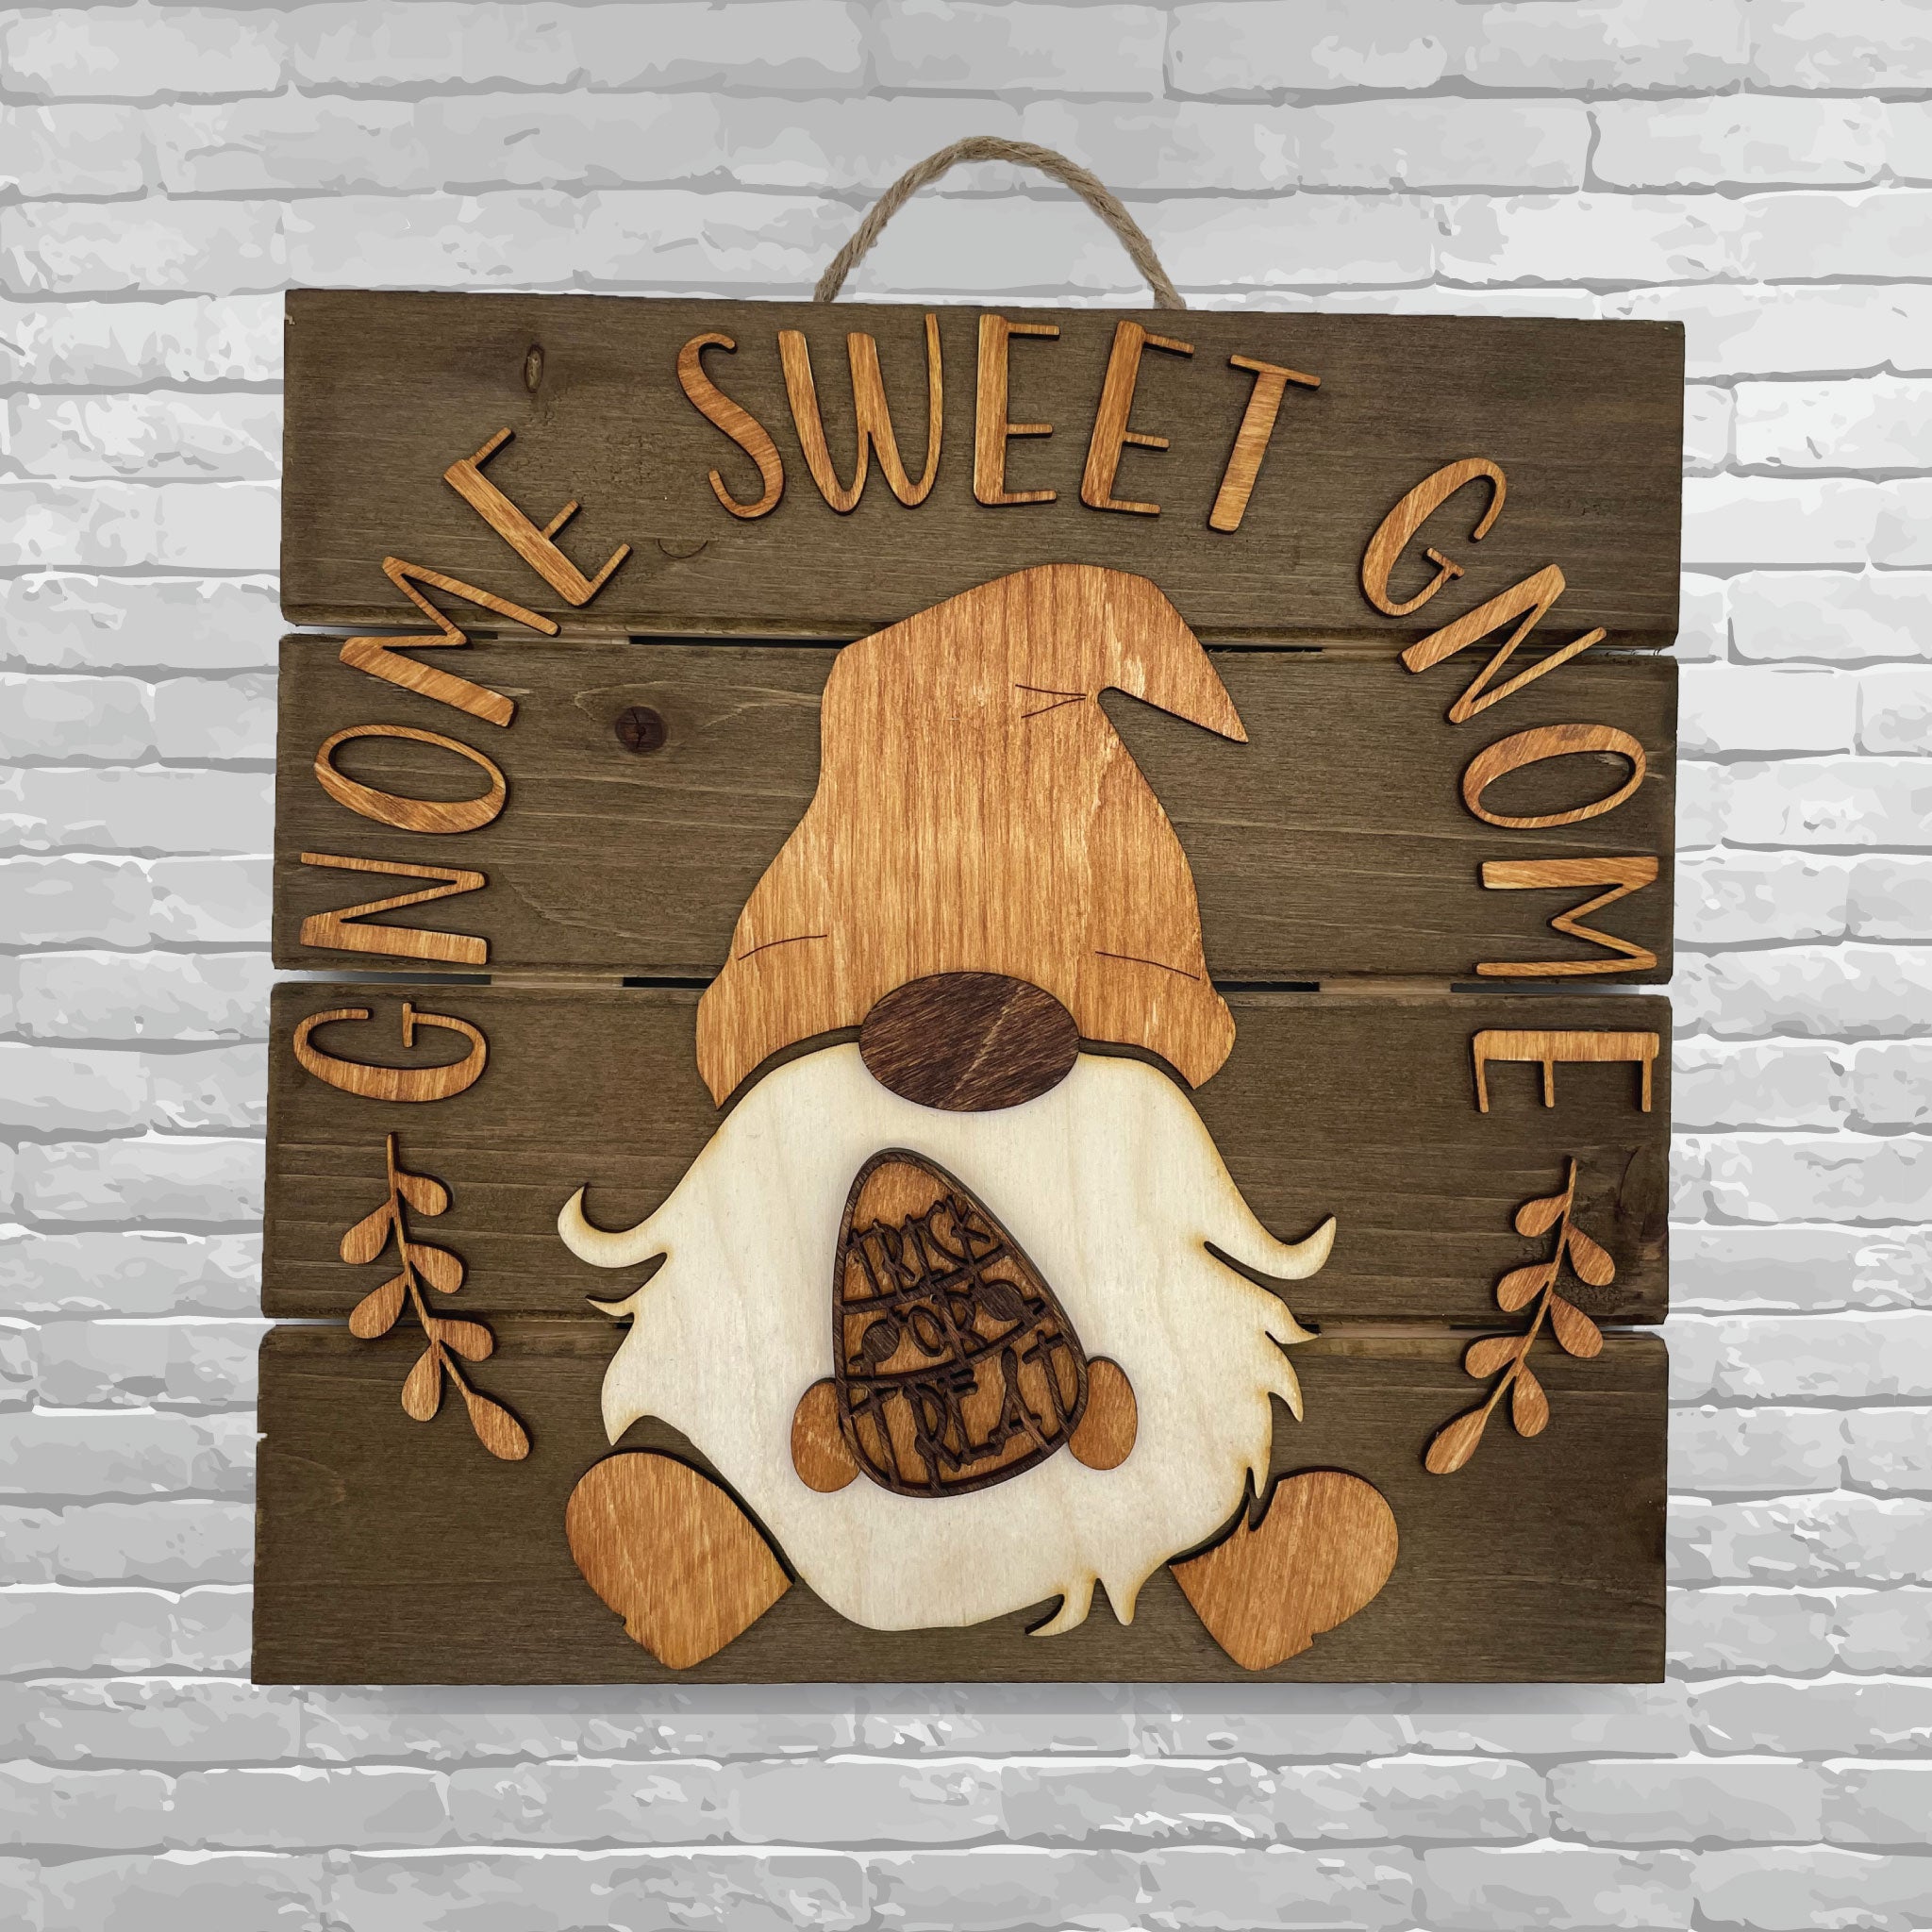 Gnome Sweet Gnome Wall Hanging